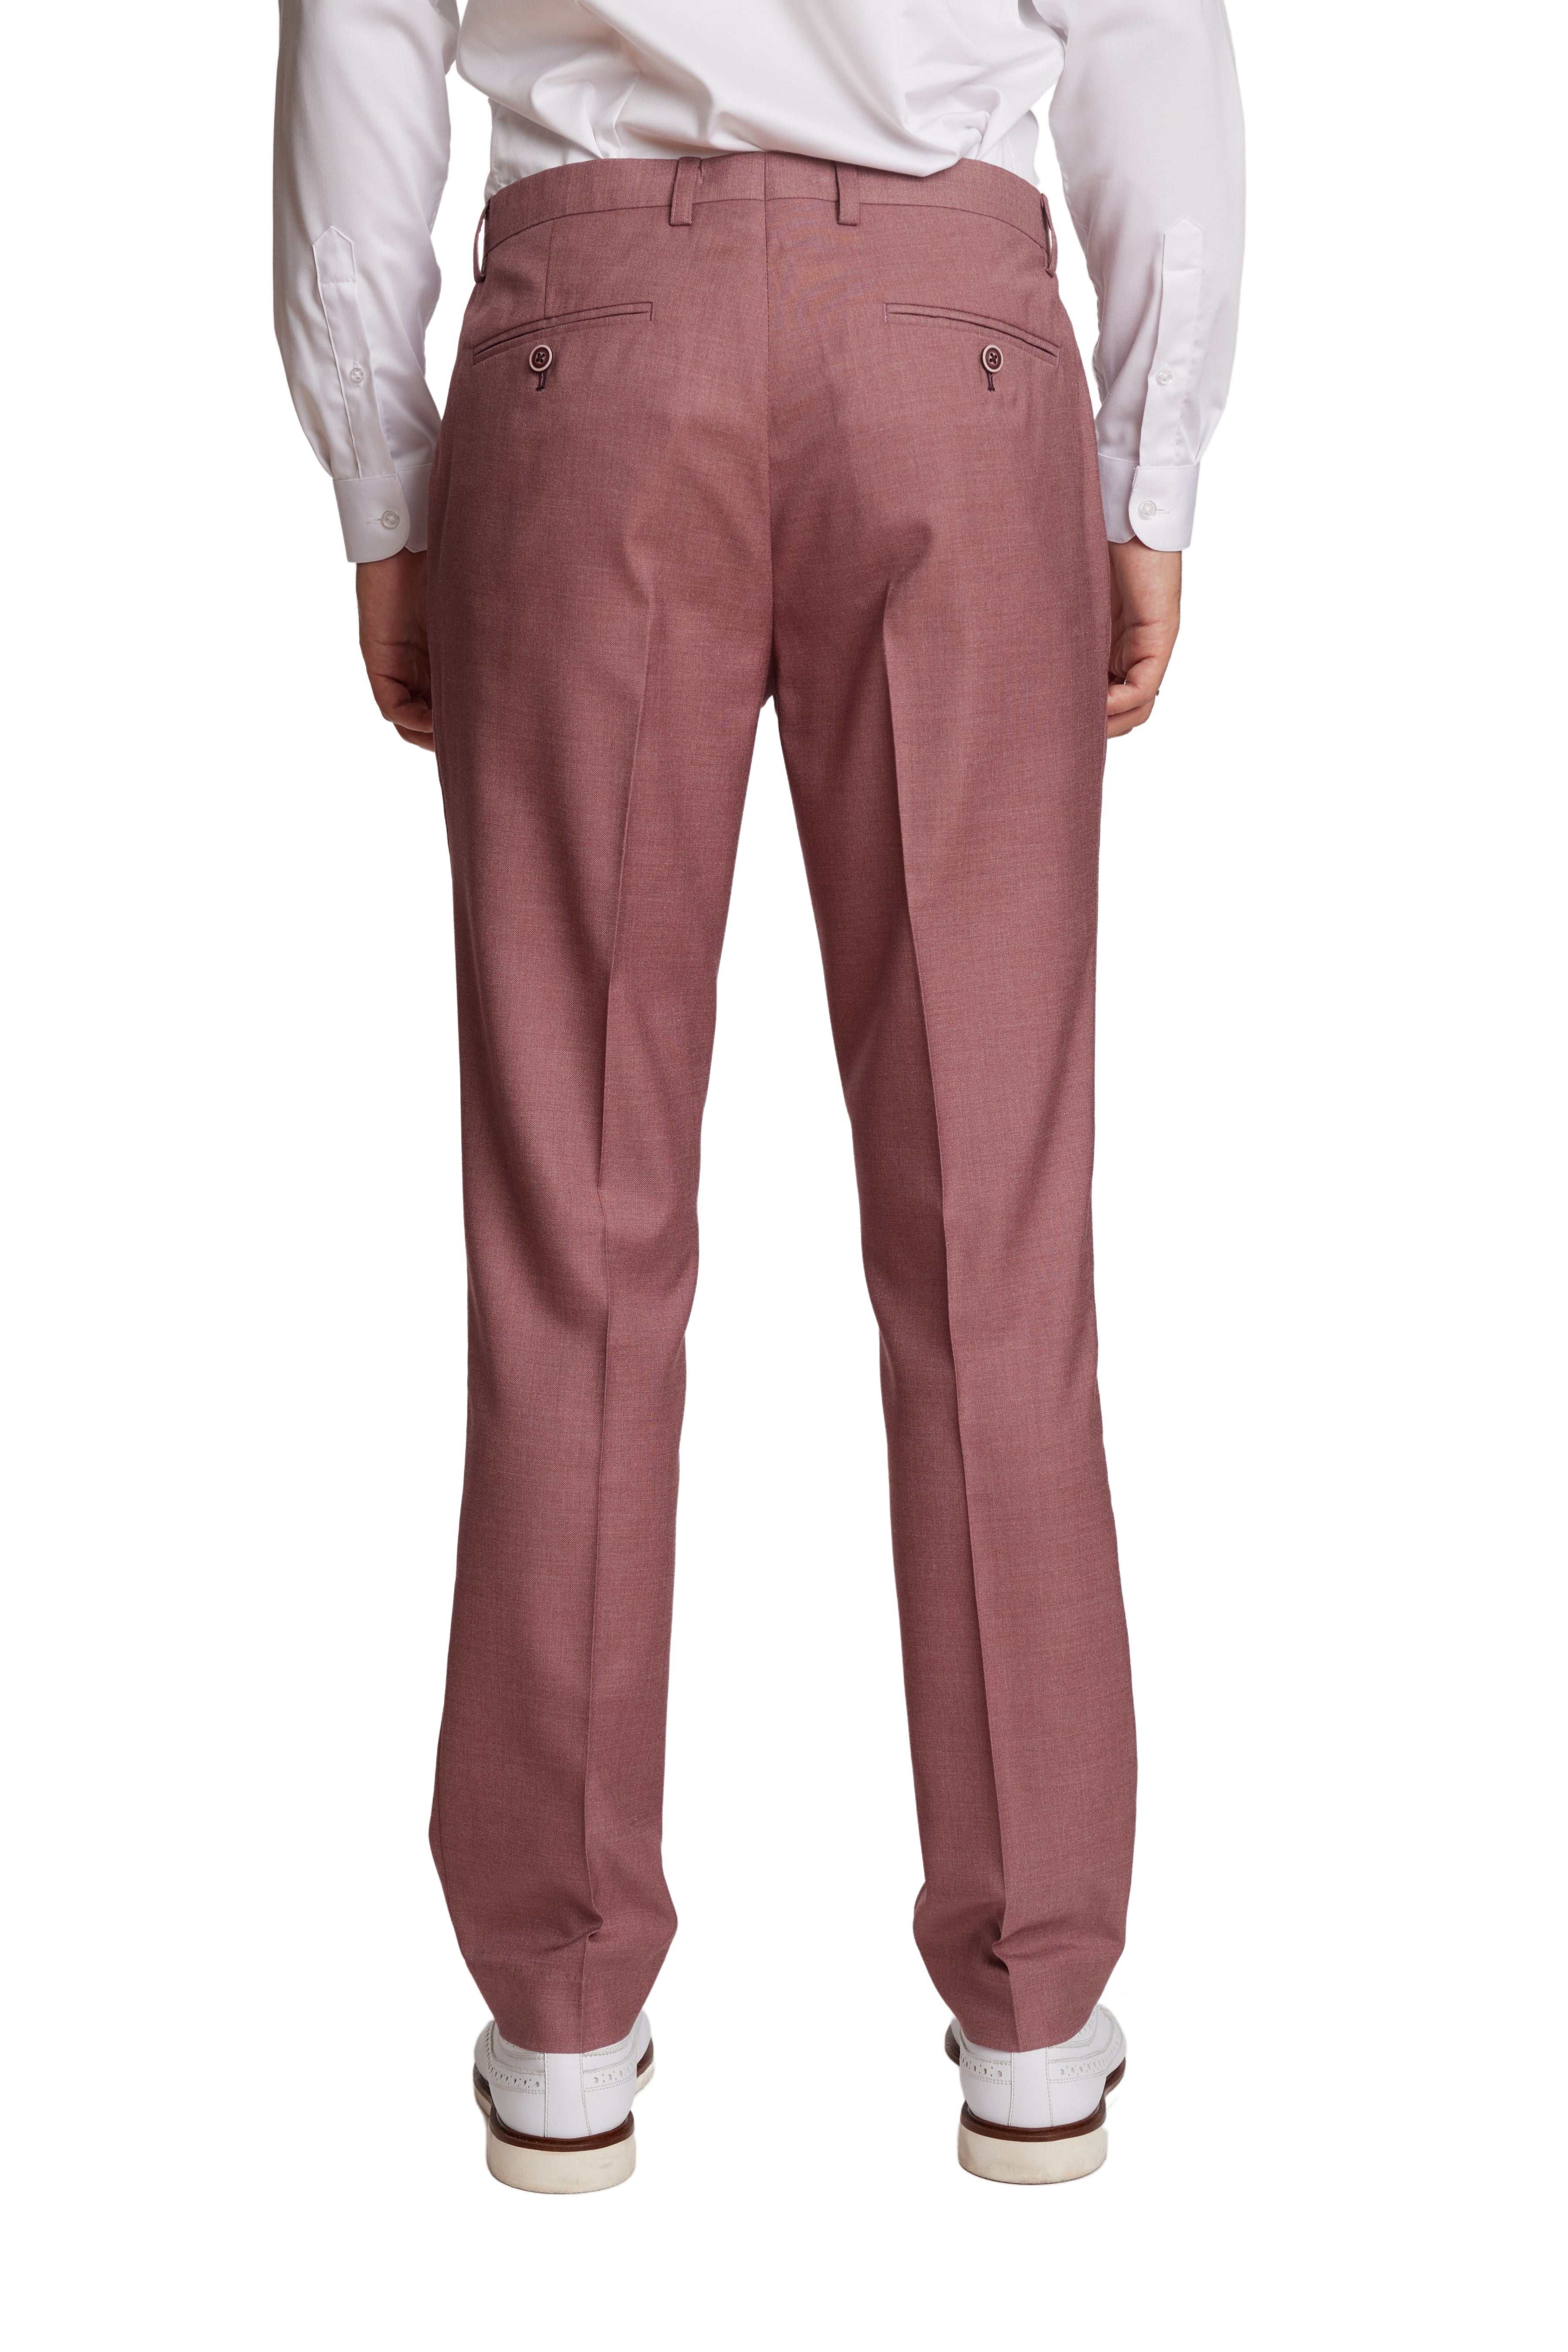 Downing Pants - slim - Dusted Pink